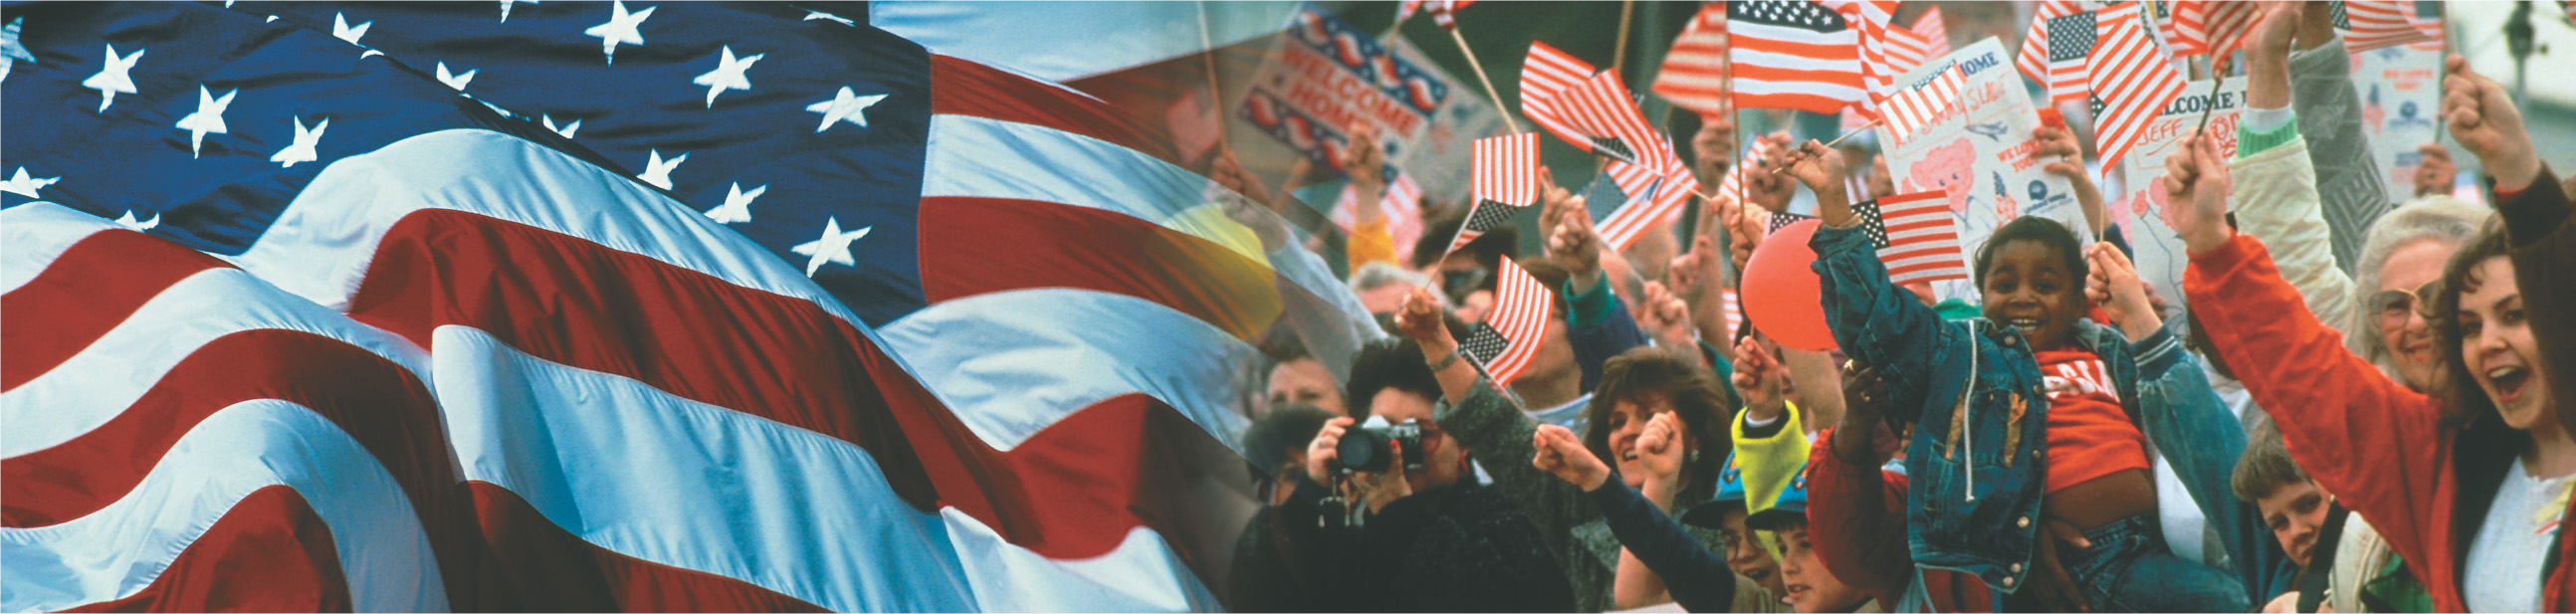 Banner: an American flag billows beside a photo of people in a crowd holding signs and waving tiny flags.